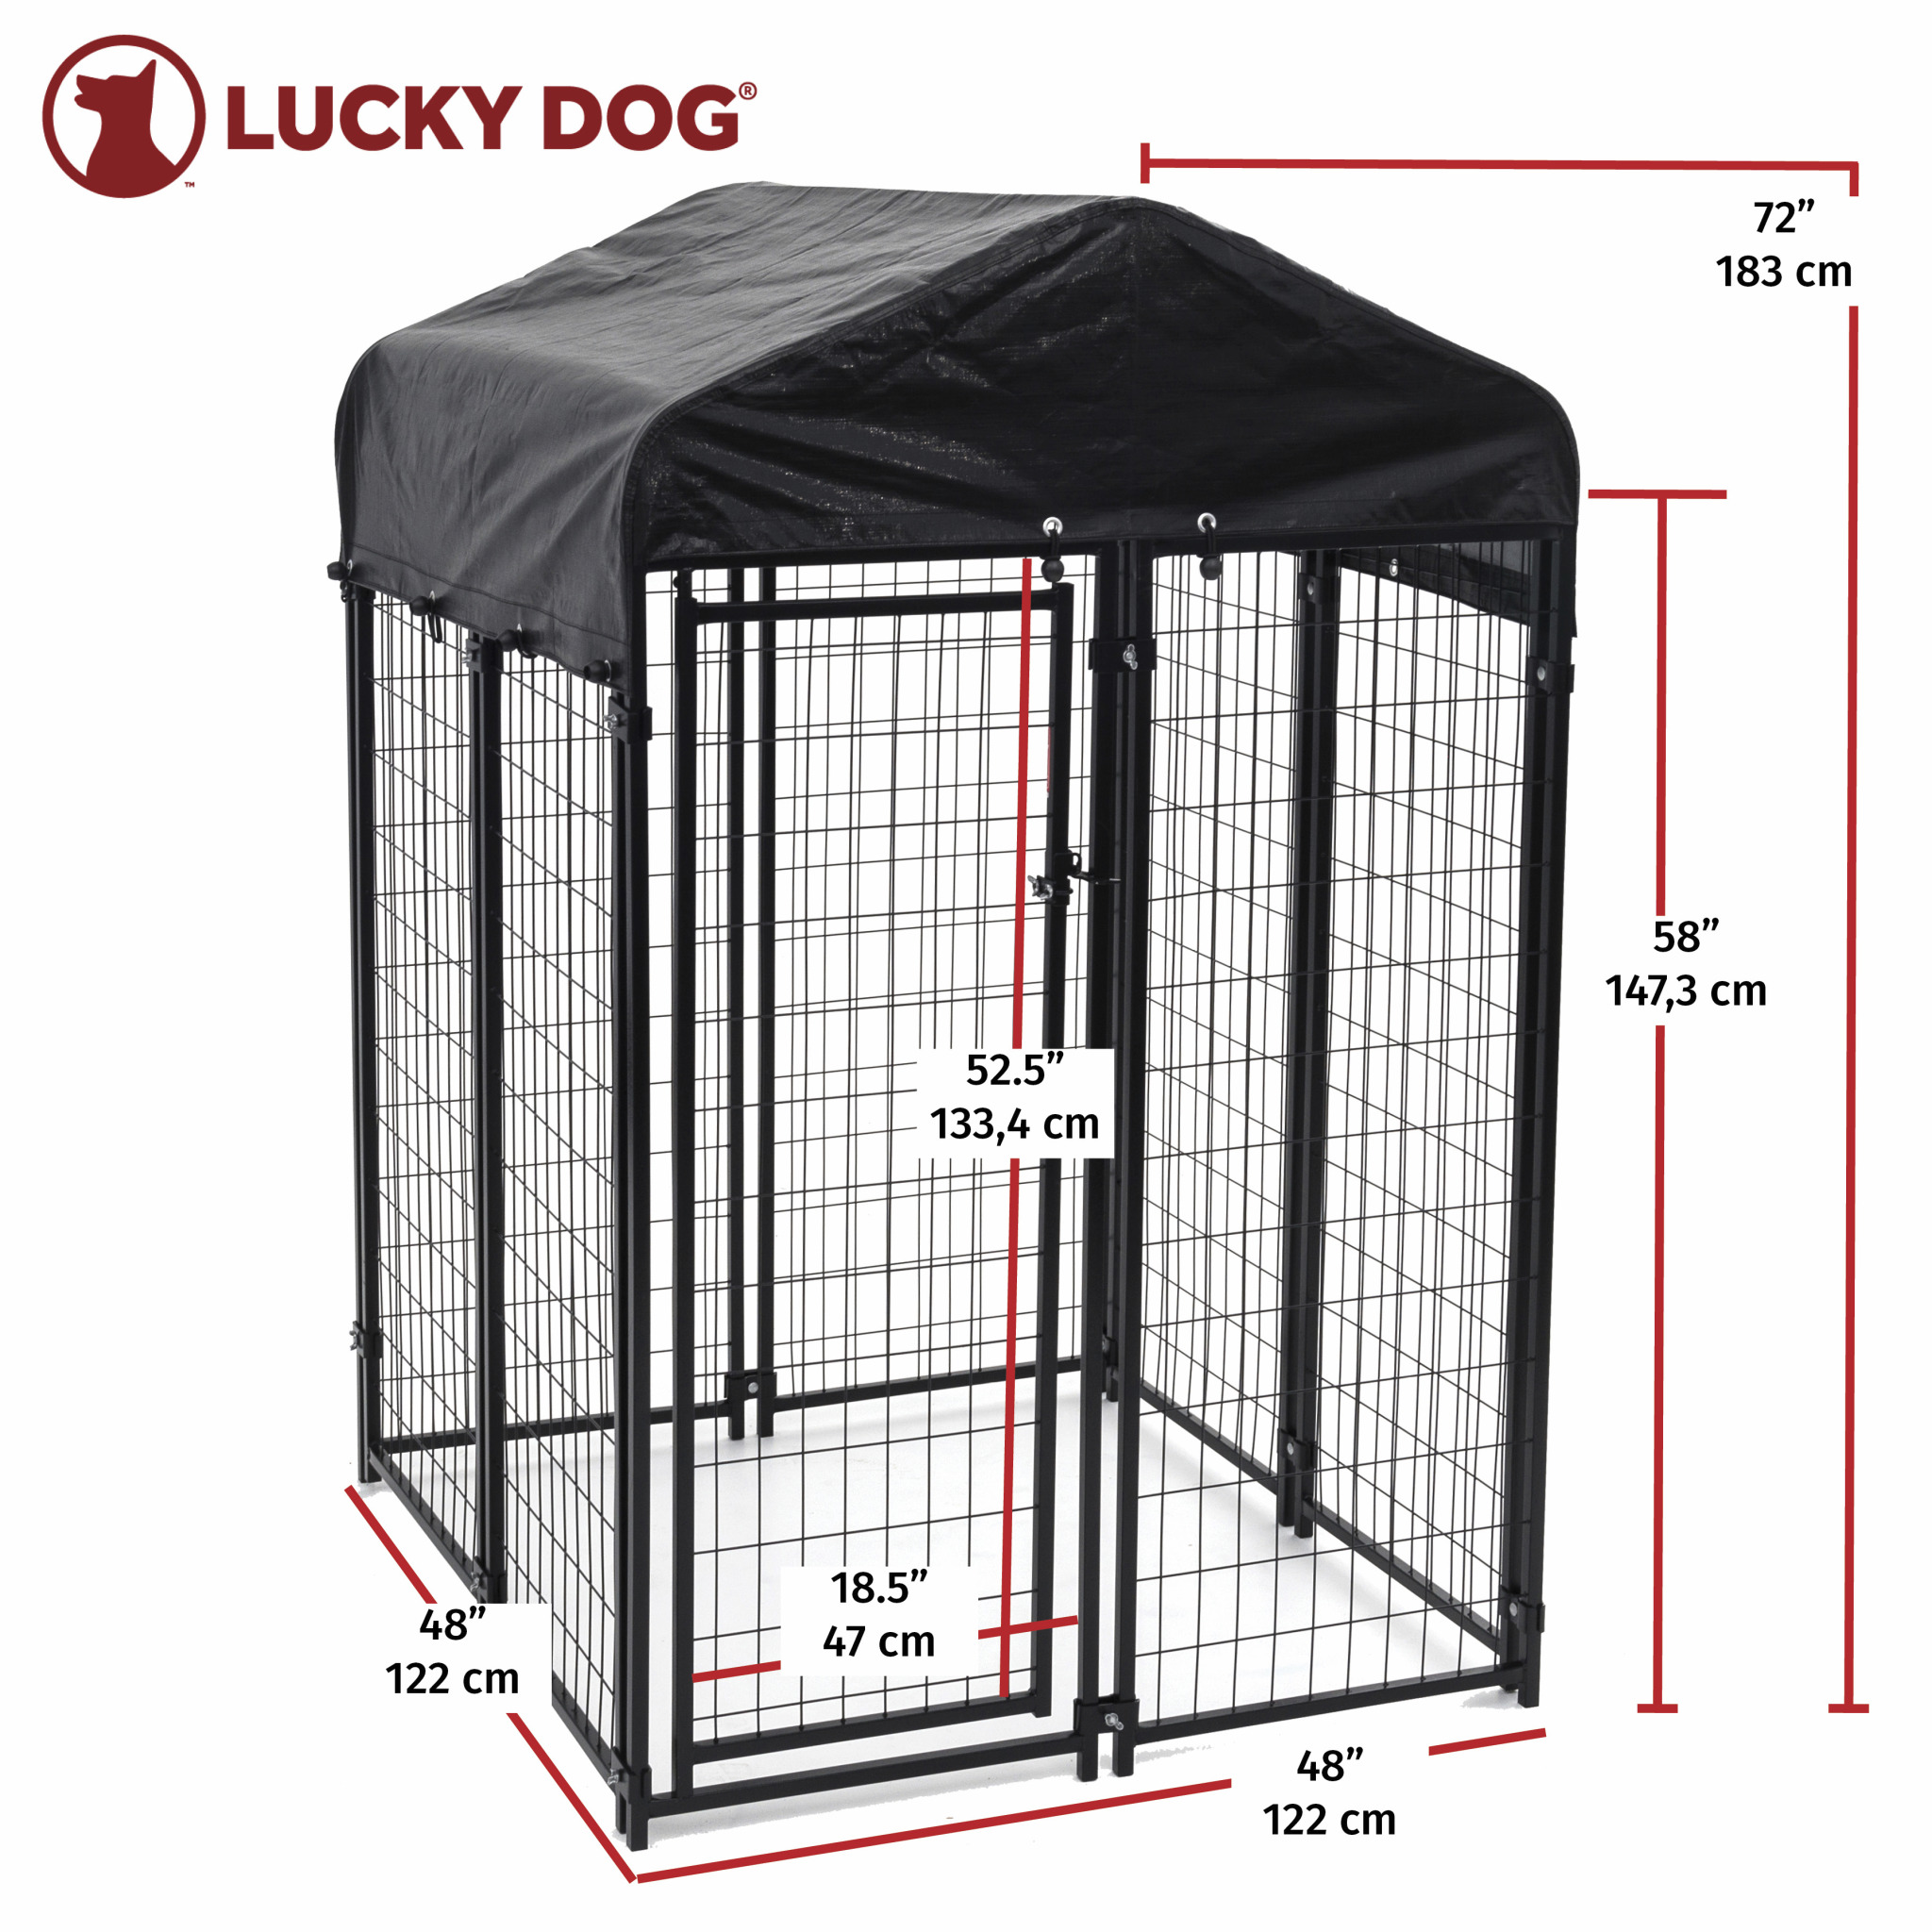 Lucky Dog Uptown Welded Wire Dog Kennel w/ Cover, 6'H x 4'W x 4'L - image 2 of 5